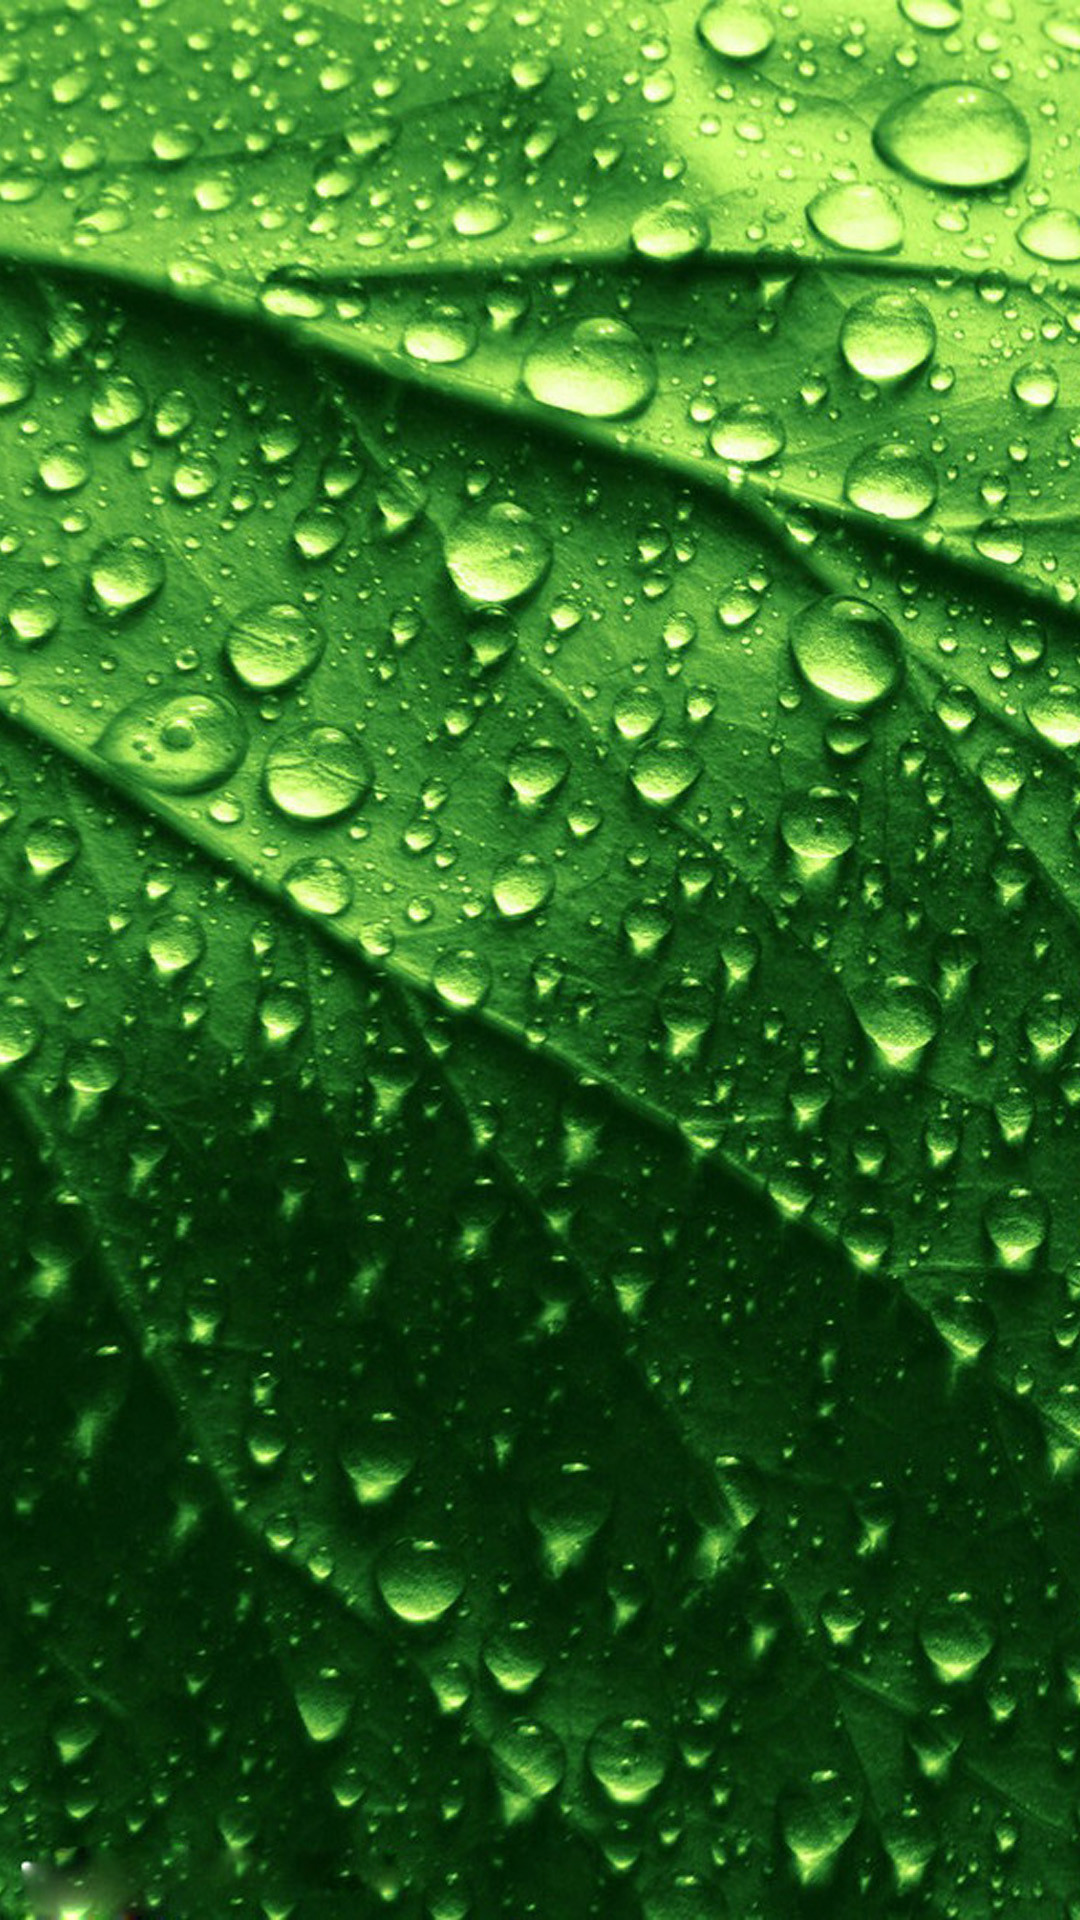 1080x1920 HD green leaves and water drops iphone 6 plus wallpaper